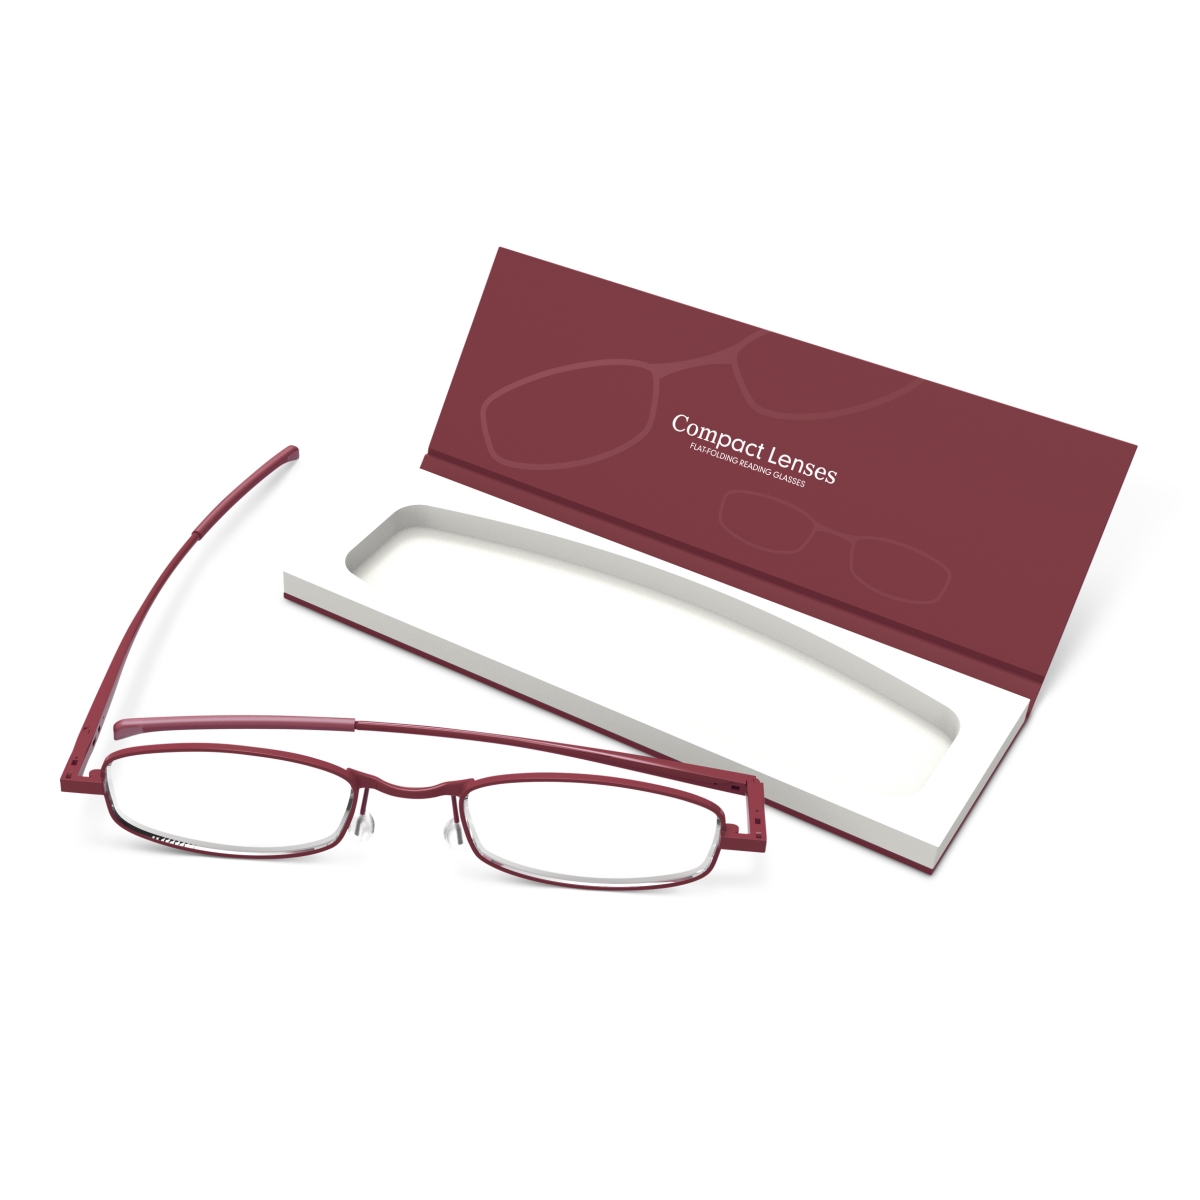 Picture of If USA 91731 Compact Lens Flat Folding Reading Glasses, Port - Plus 1.0